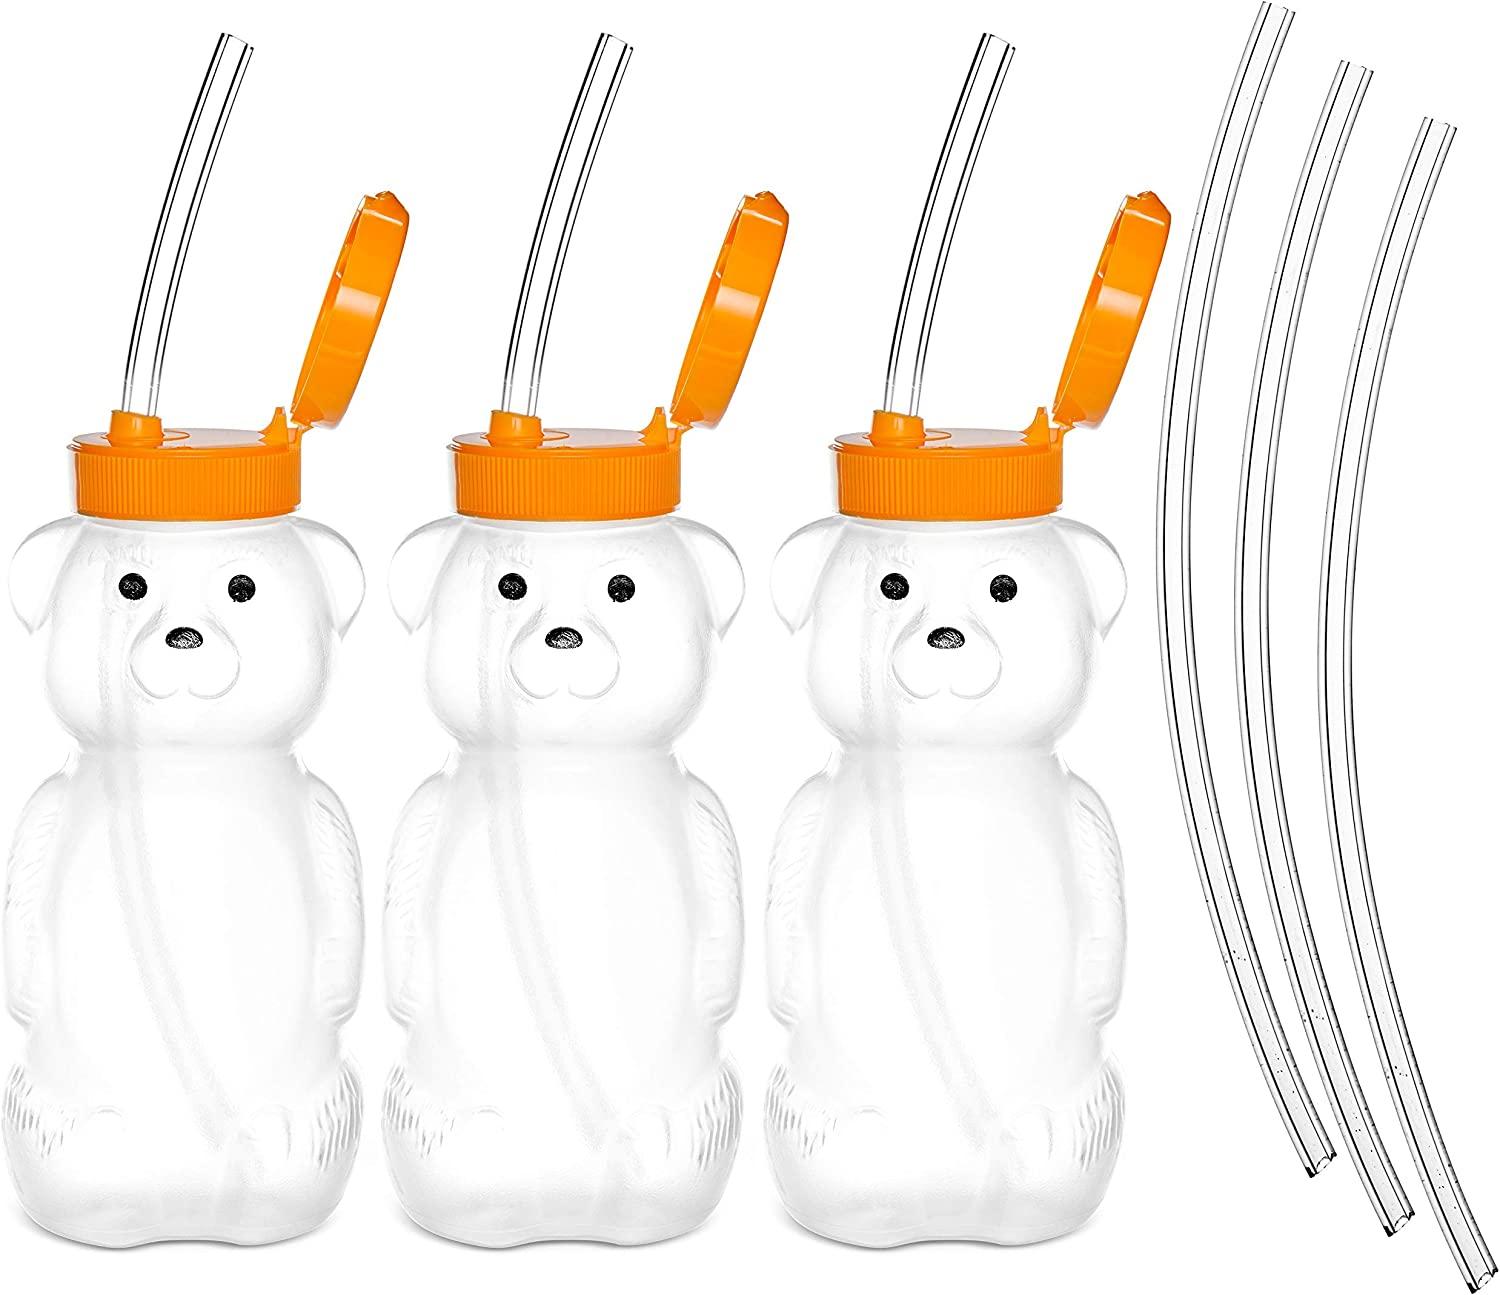 Honey Bear Straw Cup Long Straws, Squeezable Therapy and Special